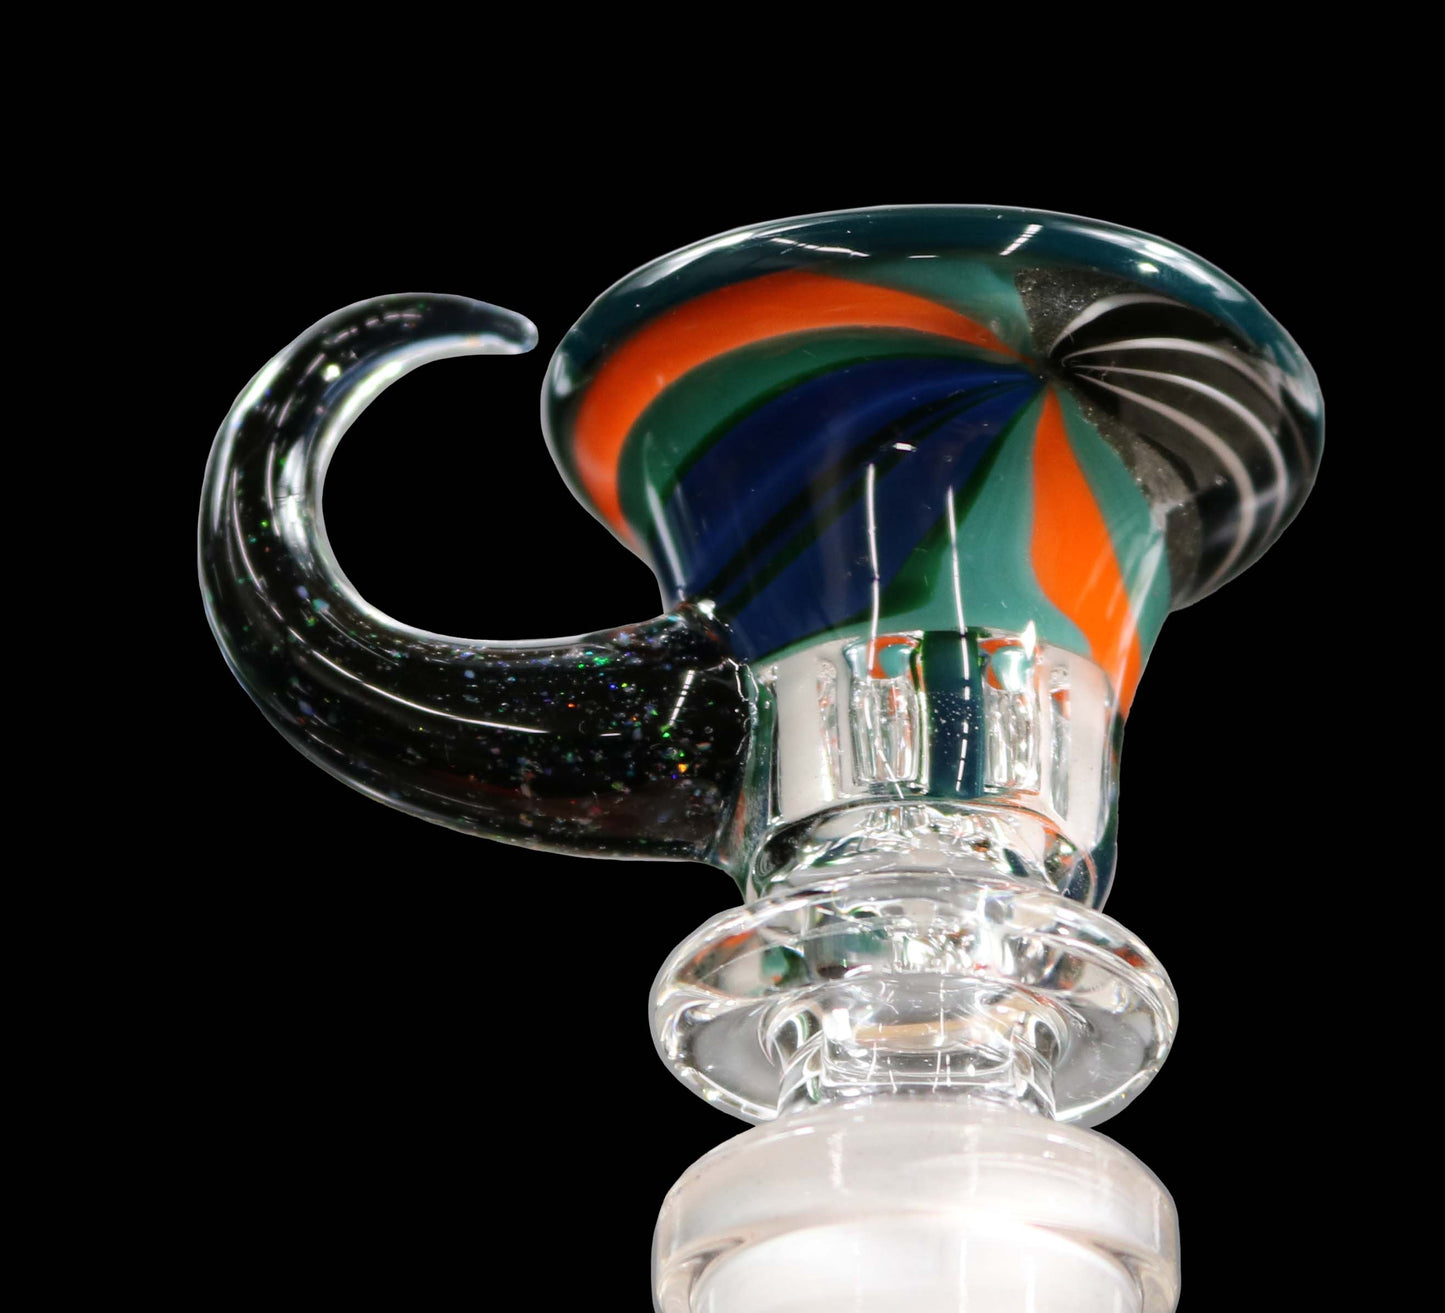 14mm Martini Bong Slide with built in screen from Glass by Slick - Teal/Orange/Blue